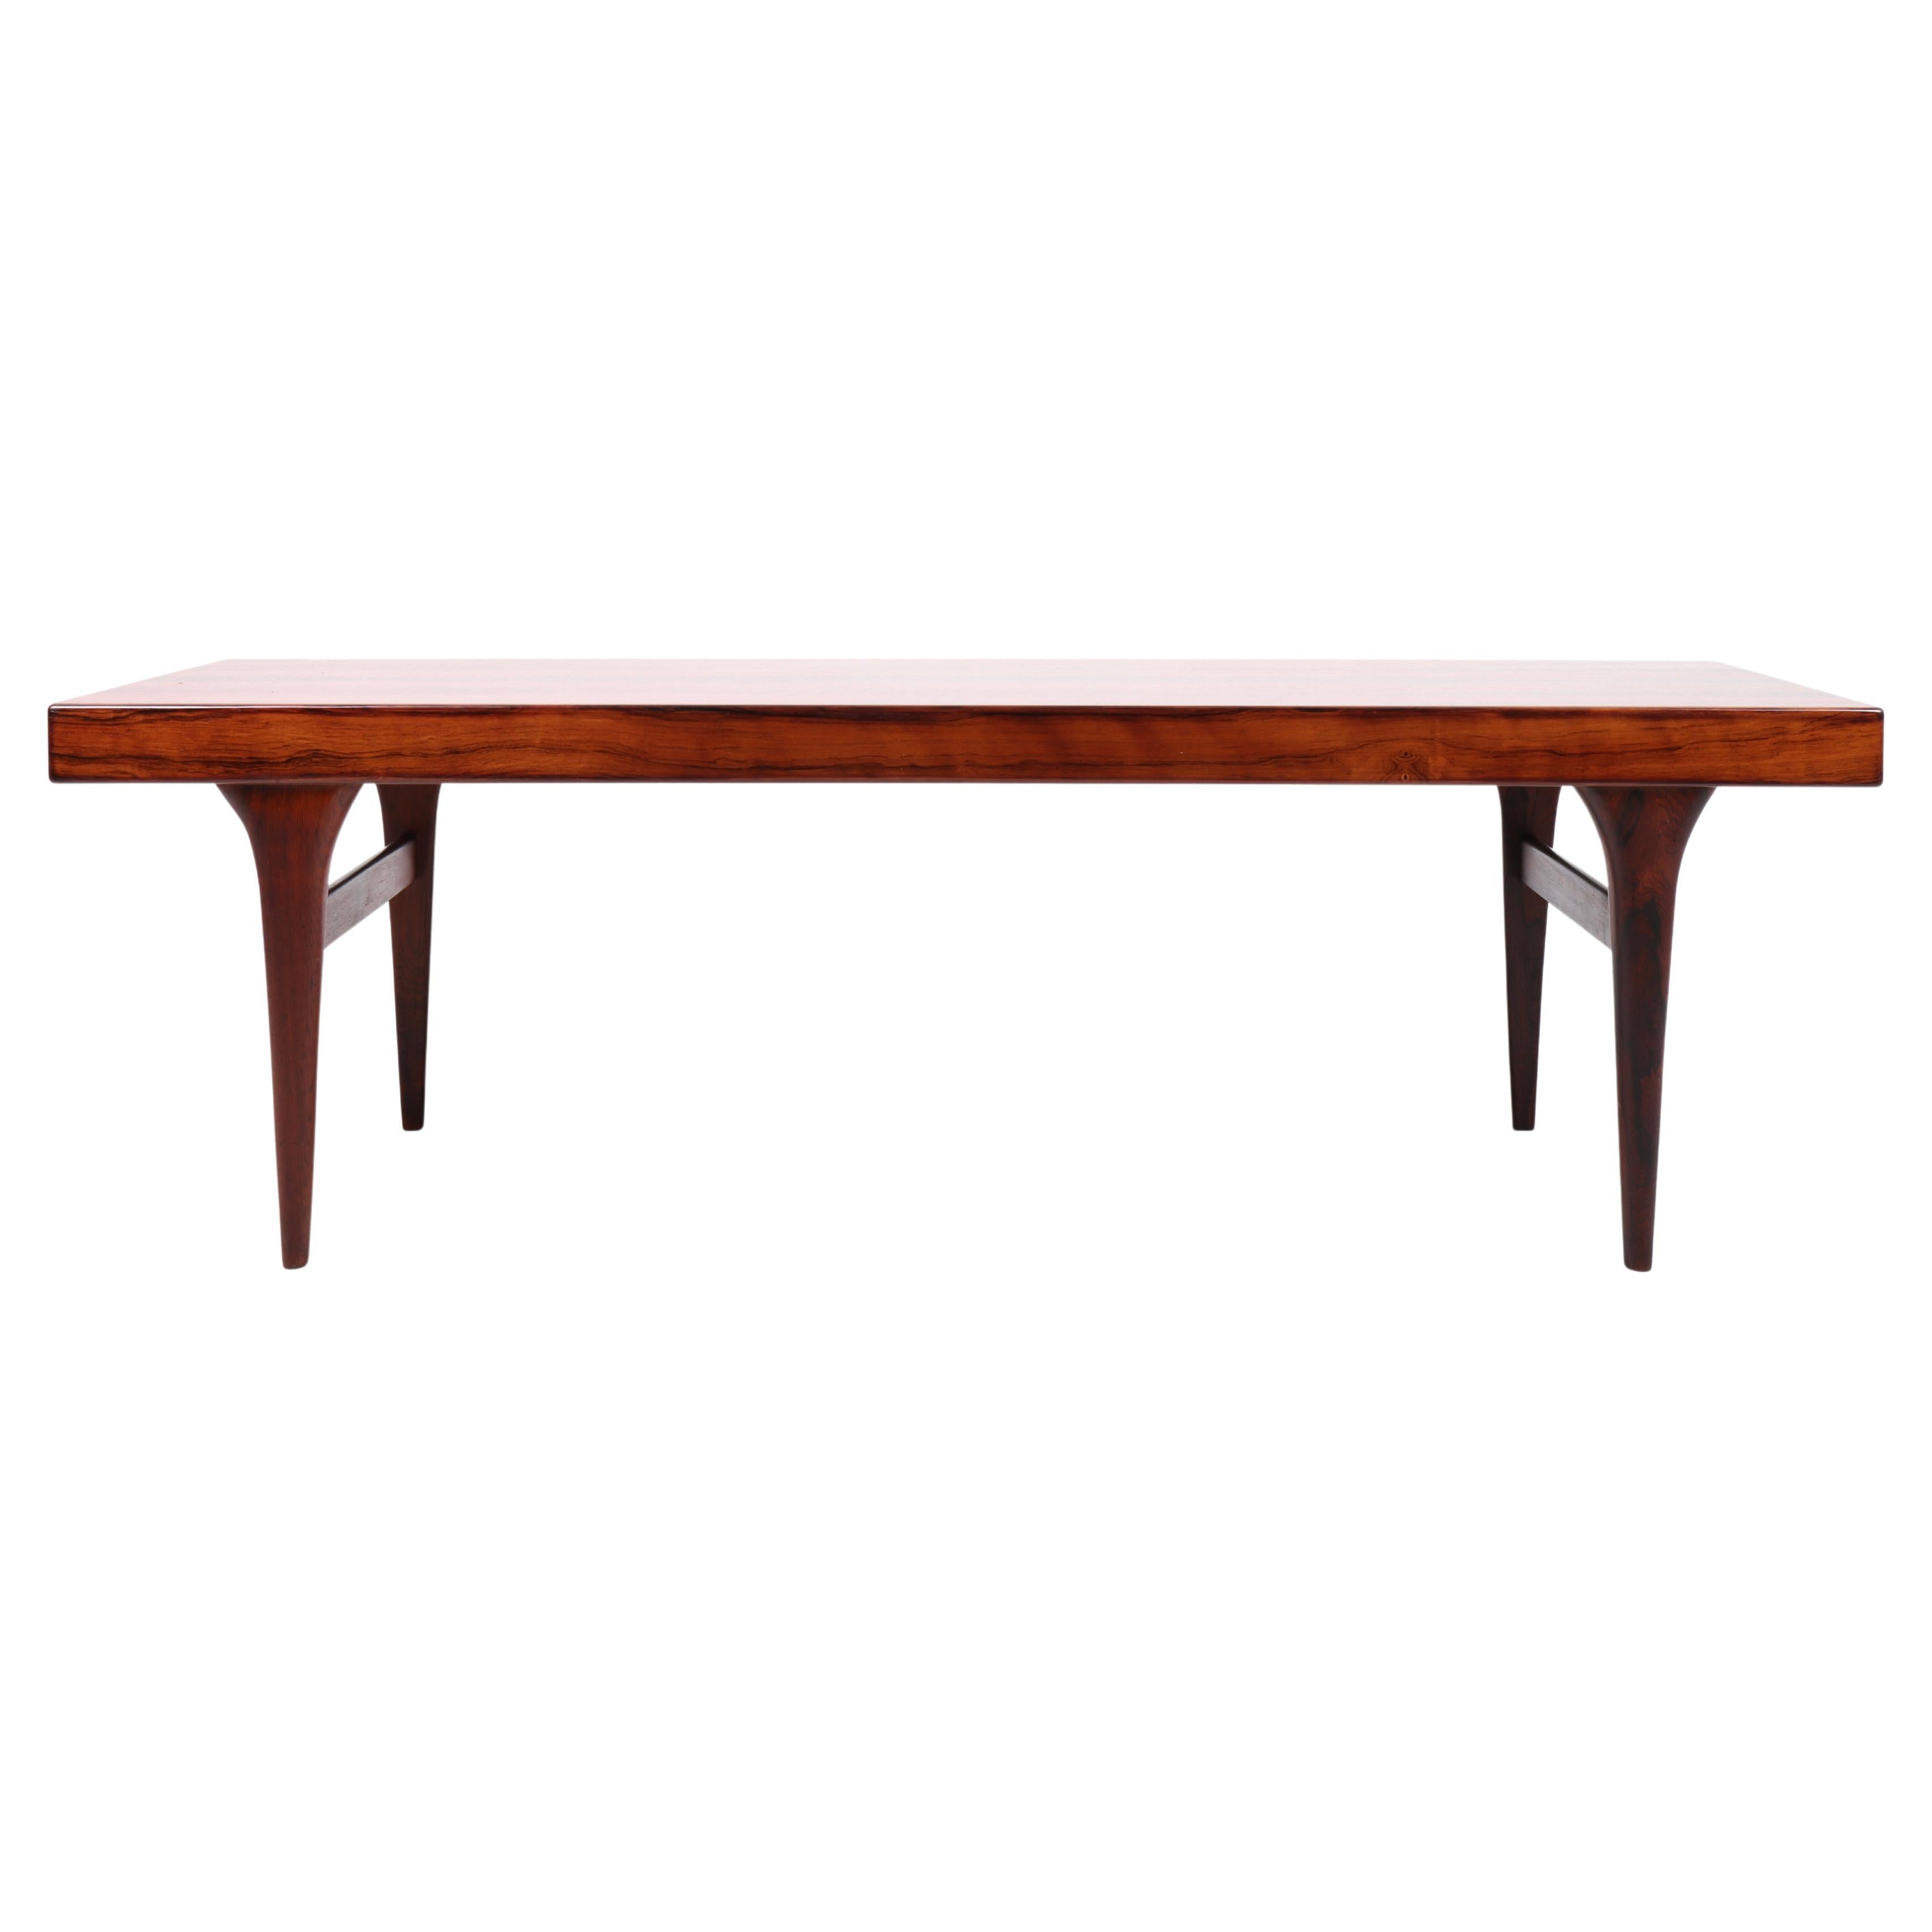 Midcentury Low Table in Rosewood, Designed by Johannes Andersen, Danish Design For Sale